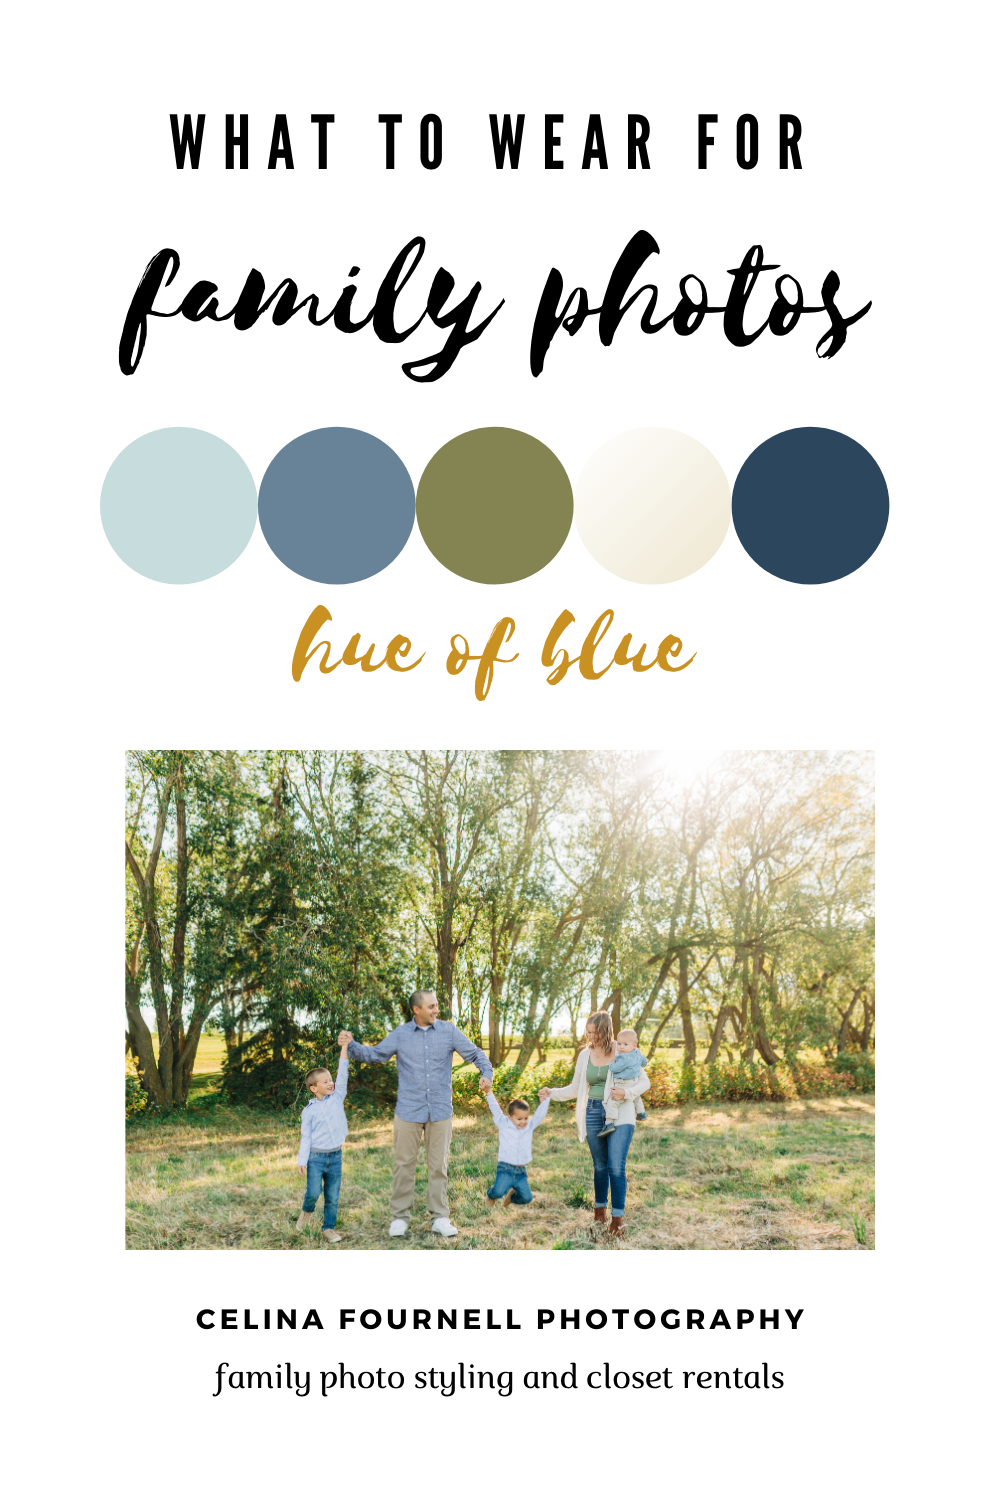 What to wear for family photos hue of blue